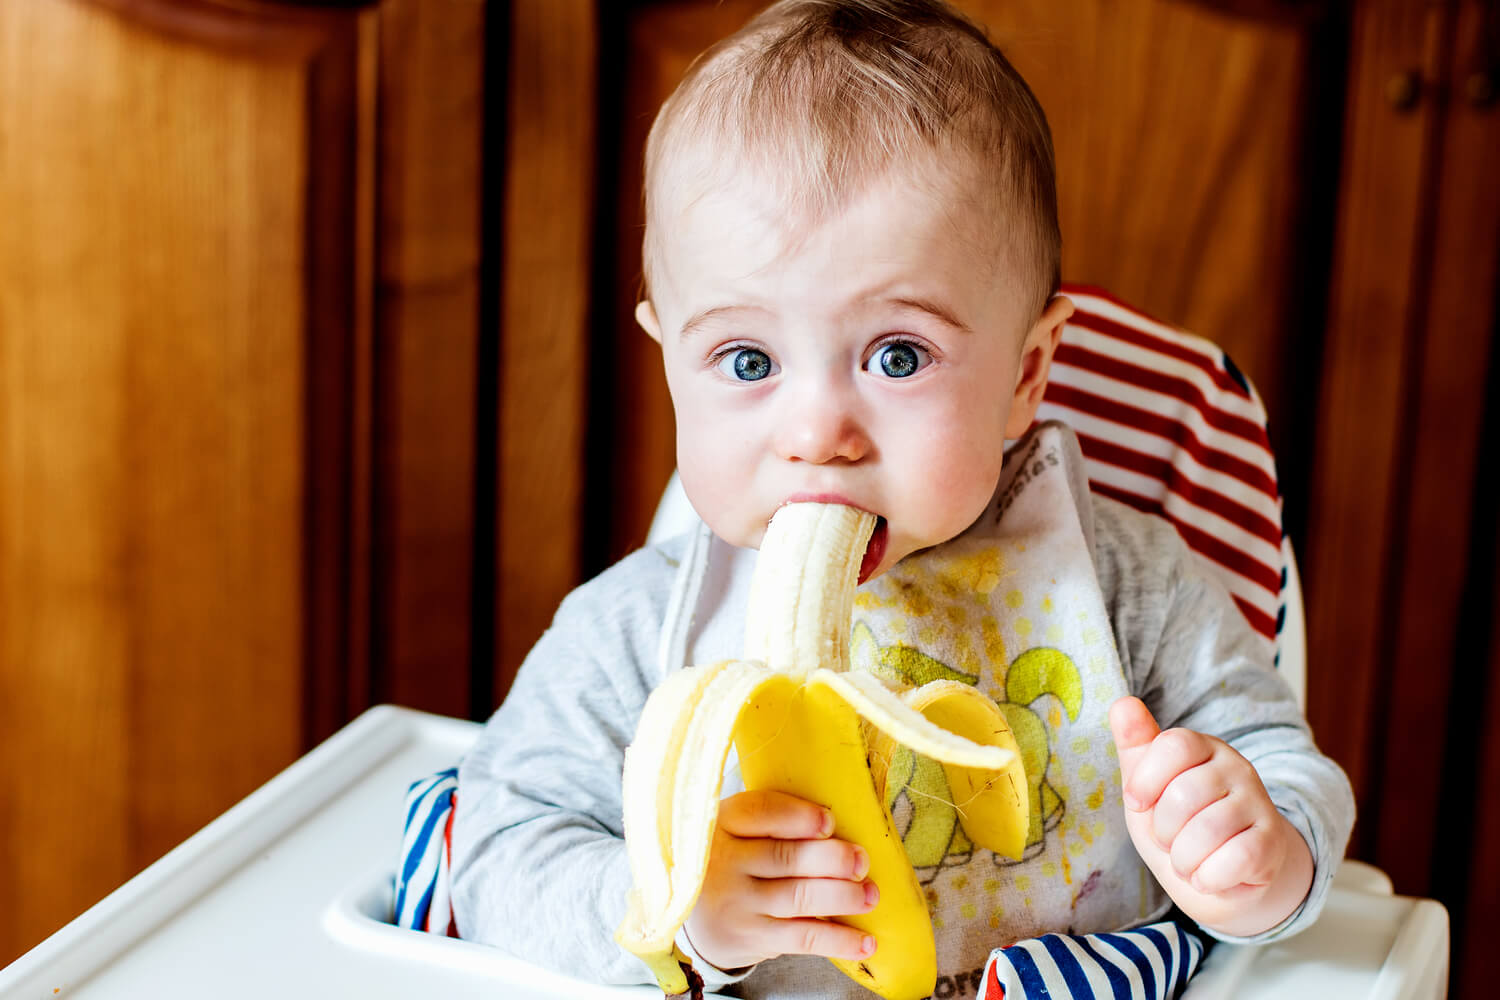 Introducing Banana to Your Baby